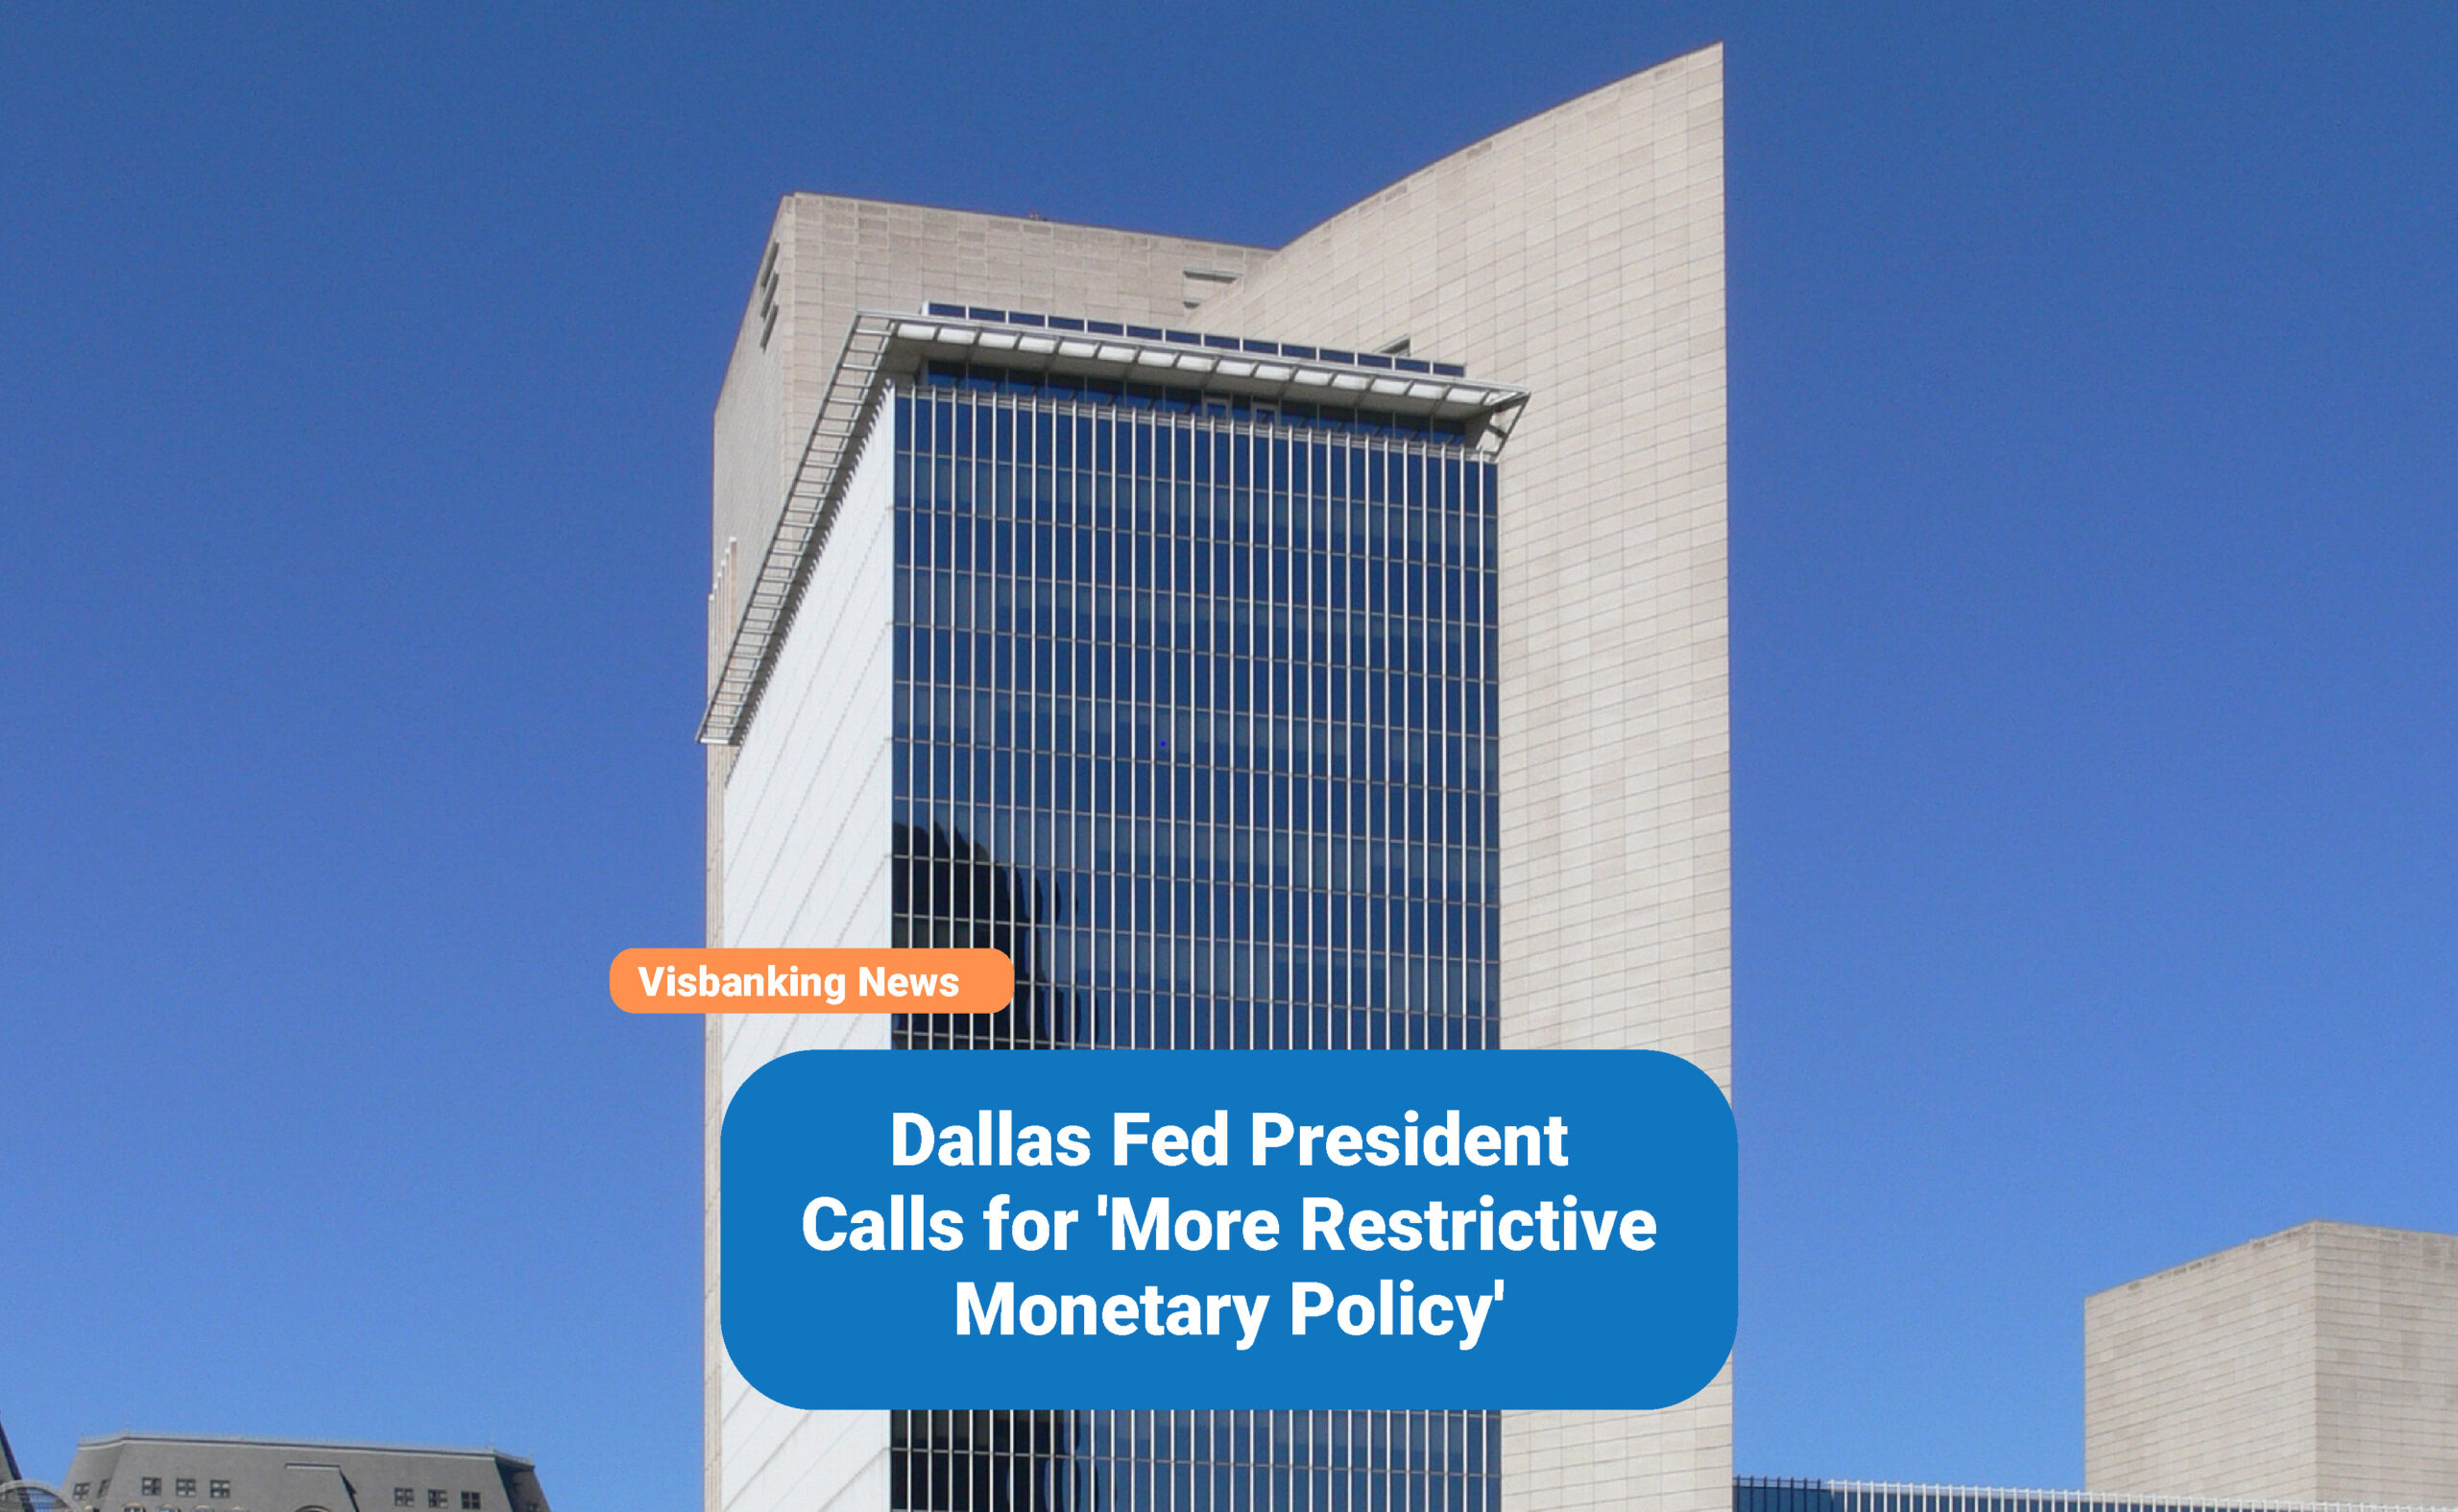 Dallas Fed President Calls for ‘More Restrictive Monetary Policy’